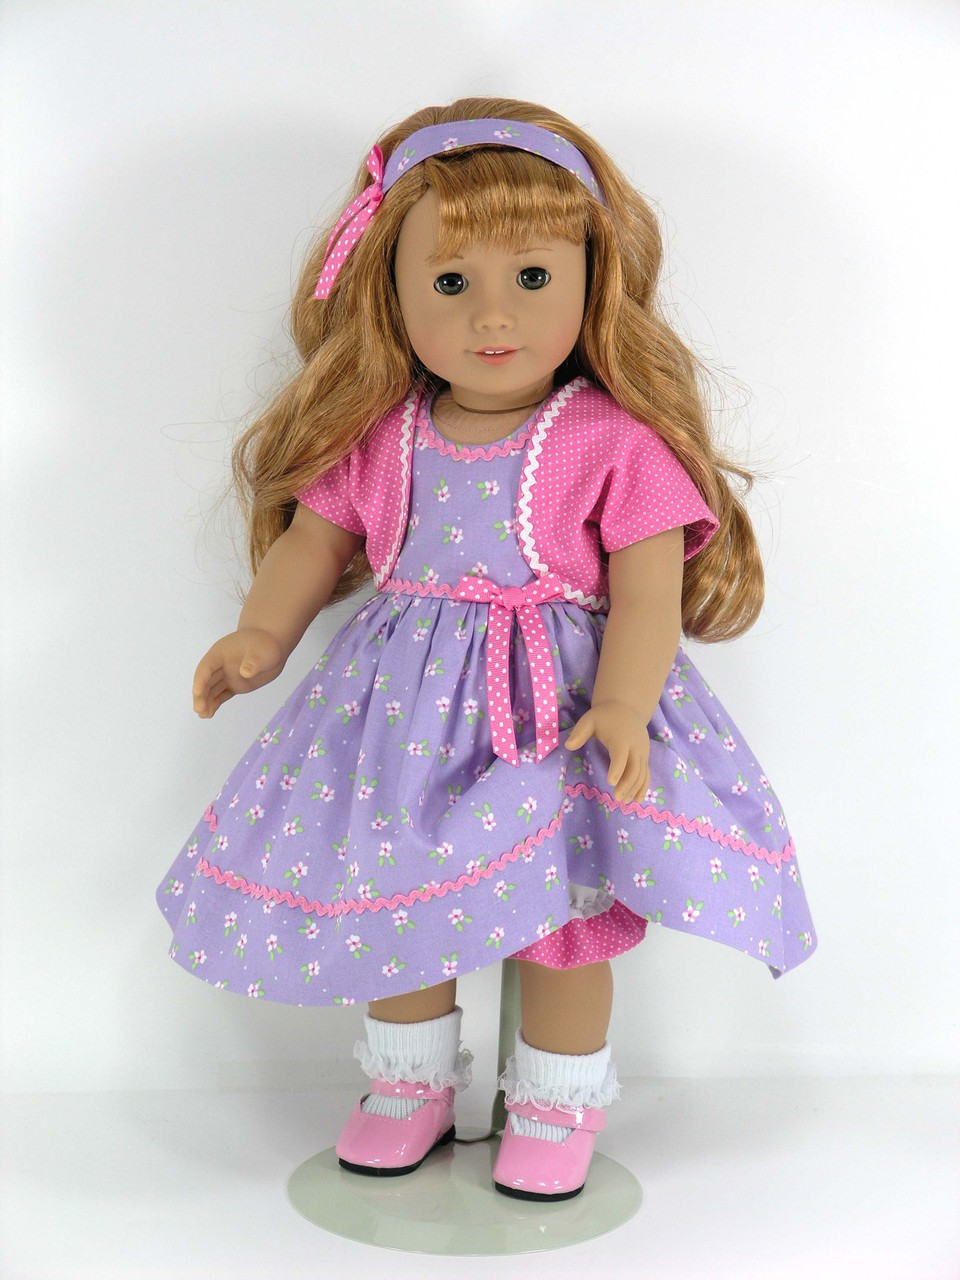 Handmade 18 inch Doll Clothes fit American Girl - Dress, Jacket ...